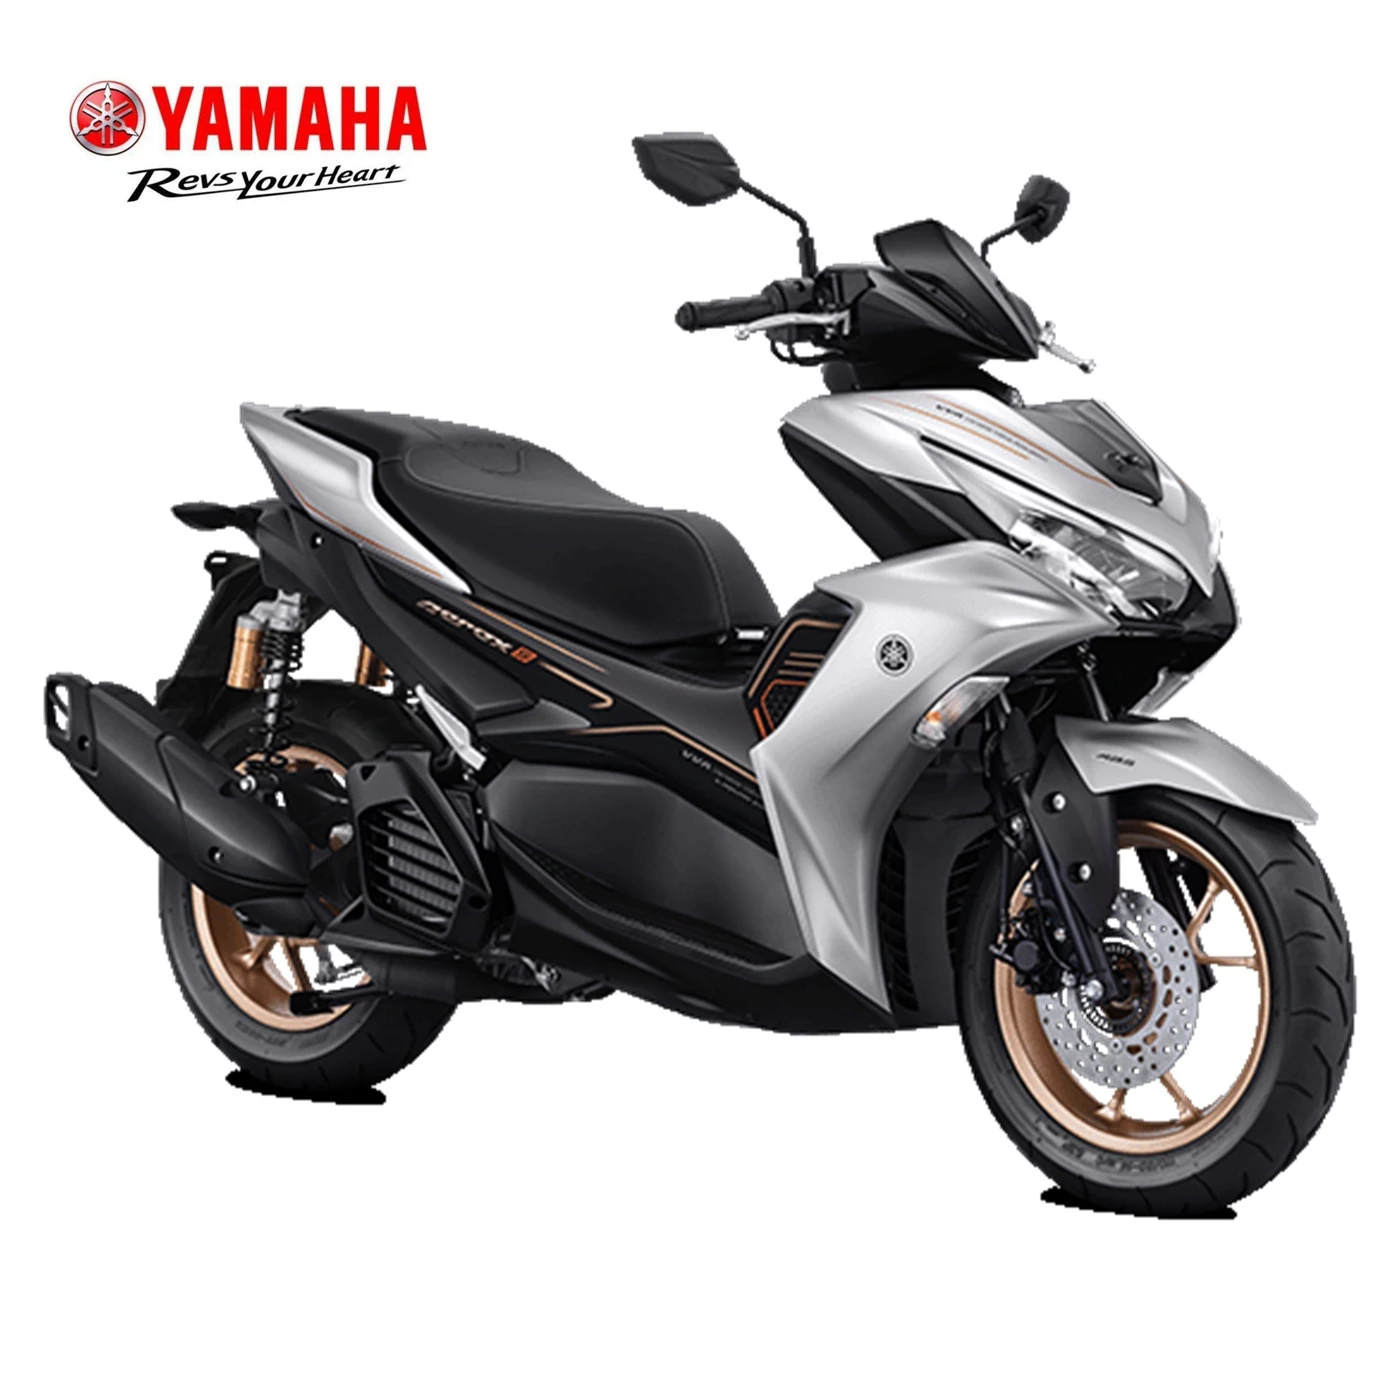 At regere Medalje Uden for Source Hot Indonesia Yamaha Scooter Aerox155 Connected Motorcycle on  m.alibaba.com